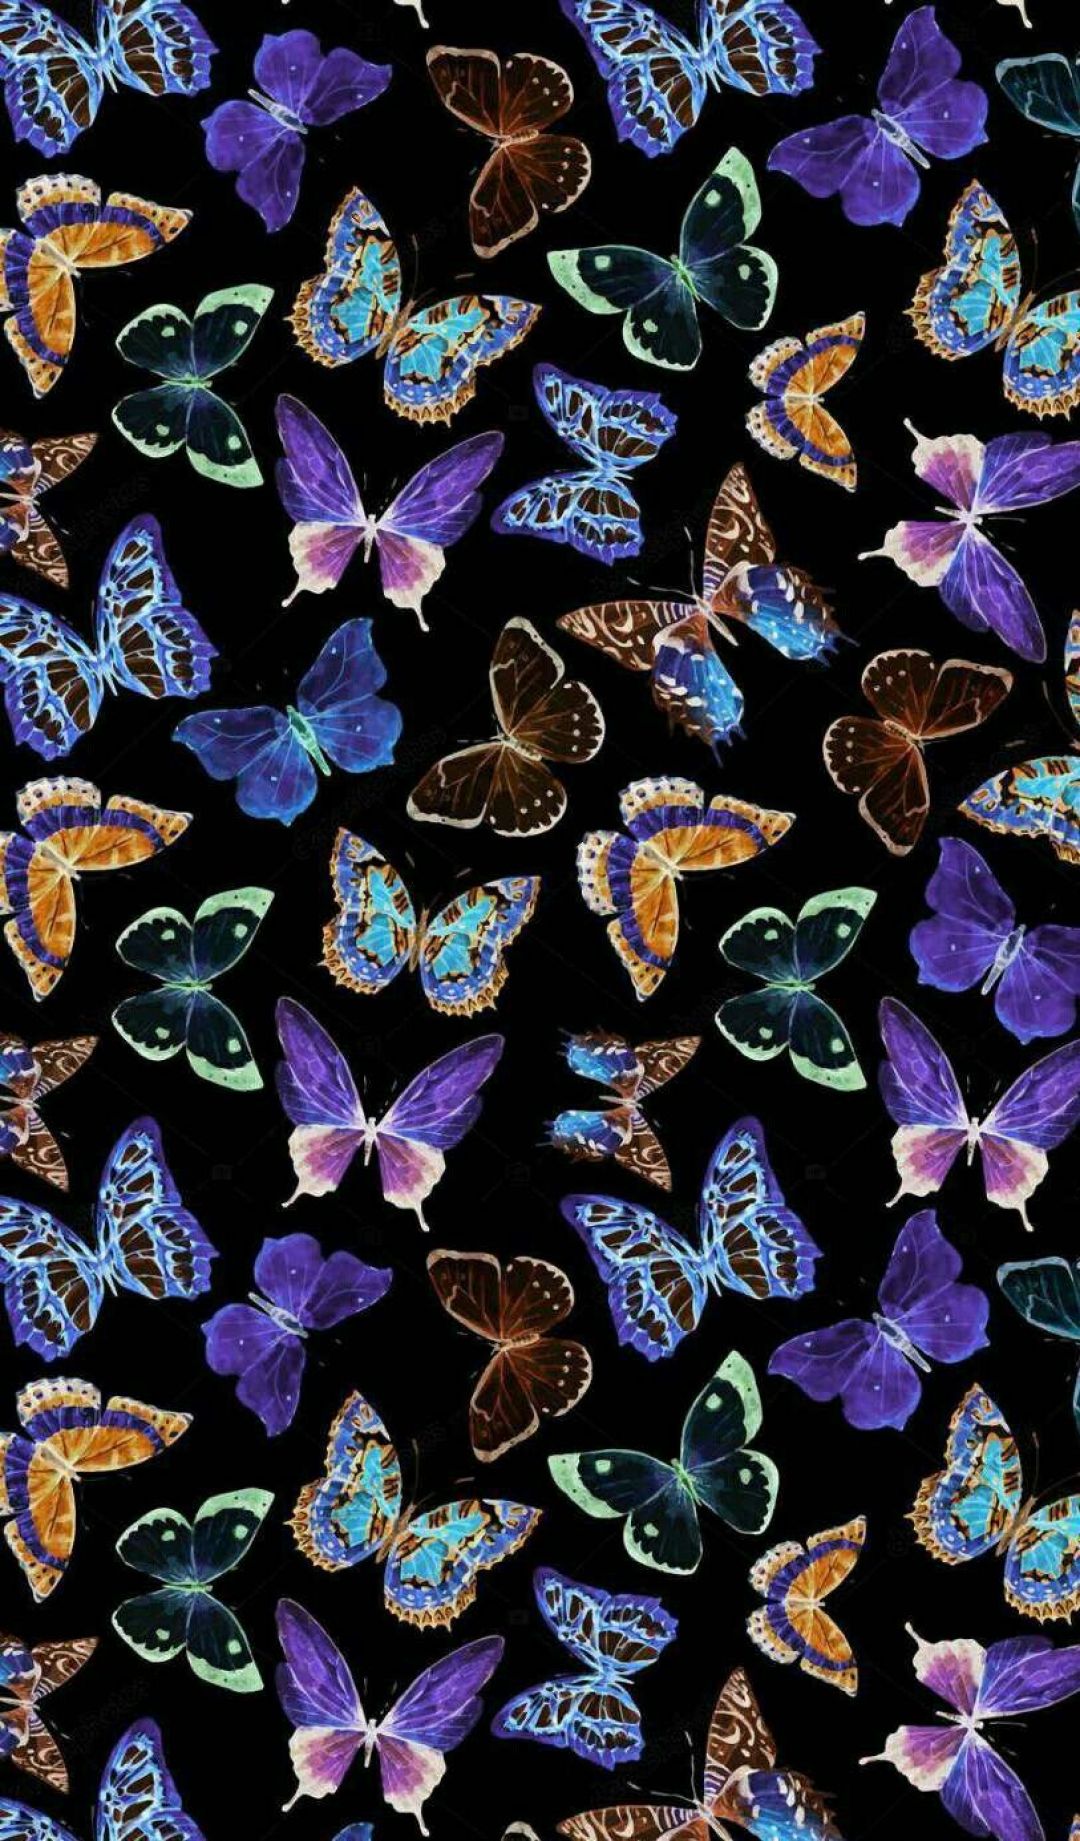 Android, Iphone, Desktop Hd Backgrounds / Wallpapers - Butterfly Iphone Wallpaper  Aesthetic - 1080x1841 Wallpaper 